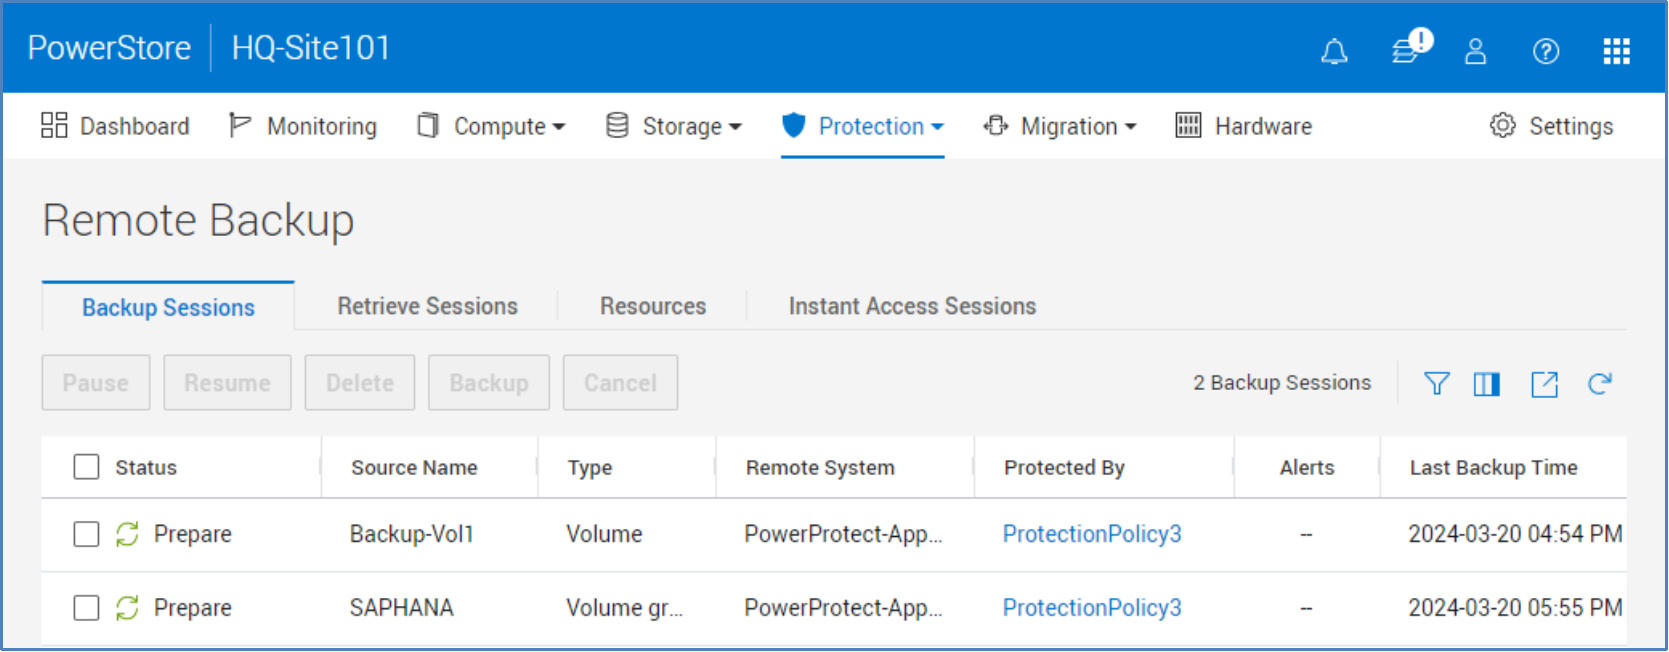 The Remote Backup page shows the backup sessions that have been created on the system. These sessions periodically create a remote backup of a resource on a PowerProtect DD system based on a backup rule, or they can be created manually at any time from this page.